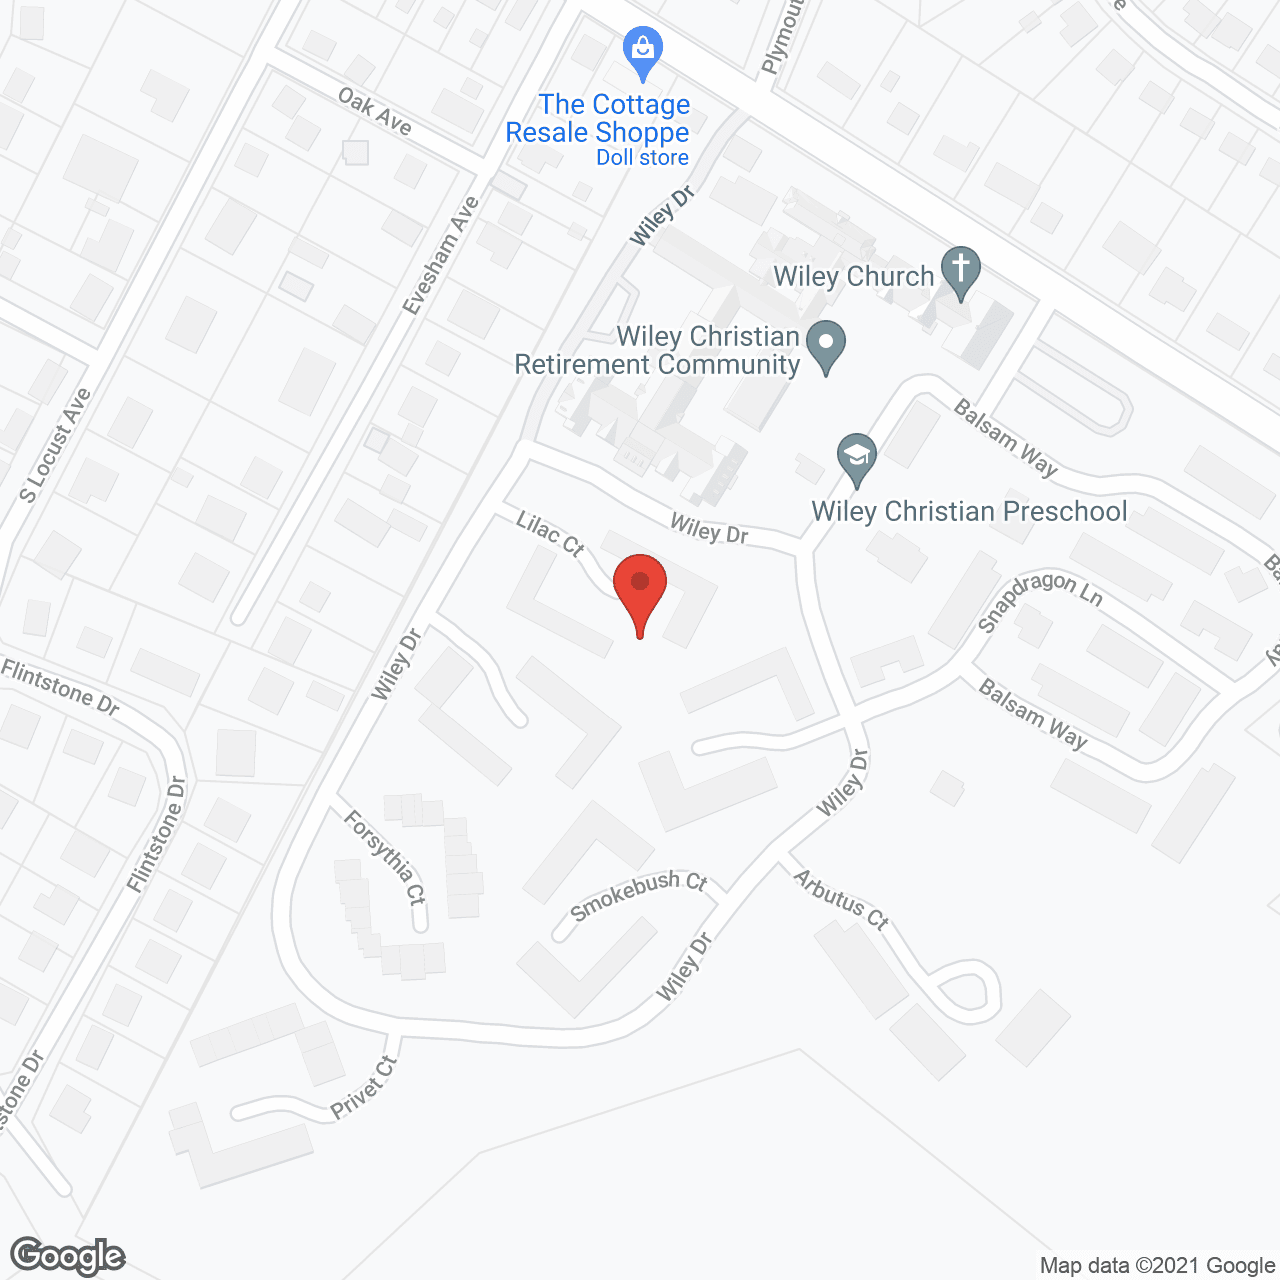 Wiley Christian Retirement Community in google map